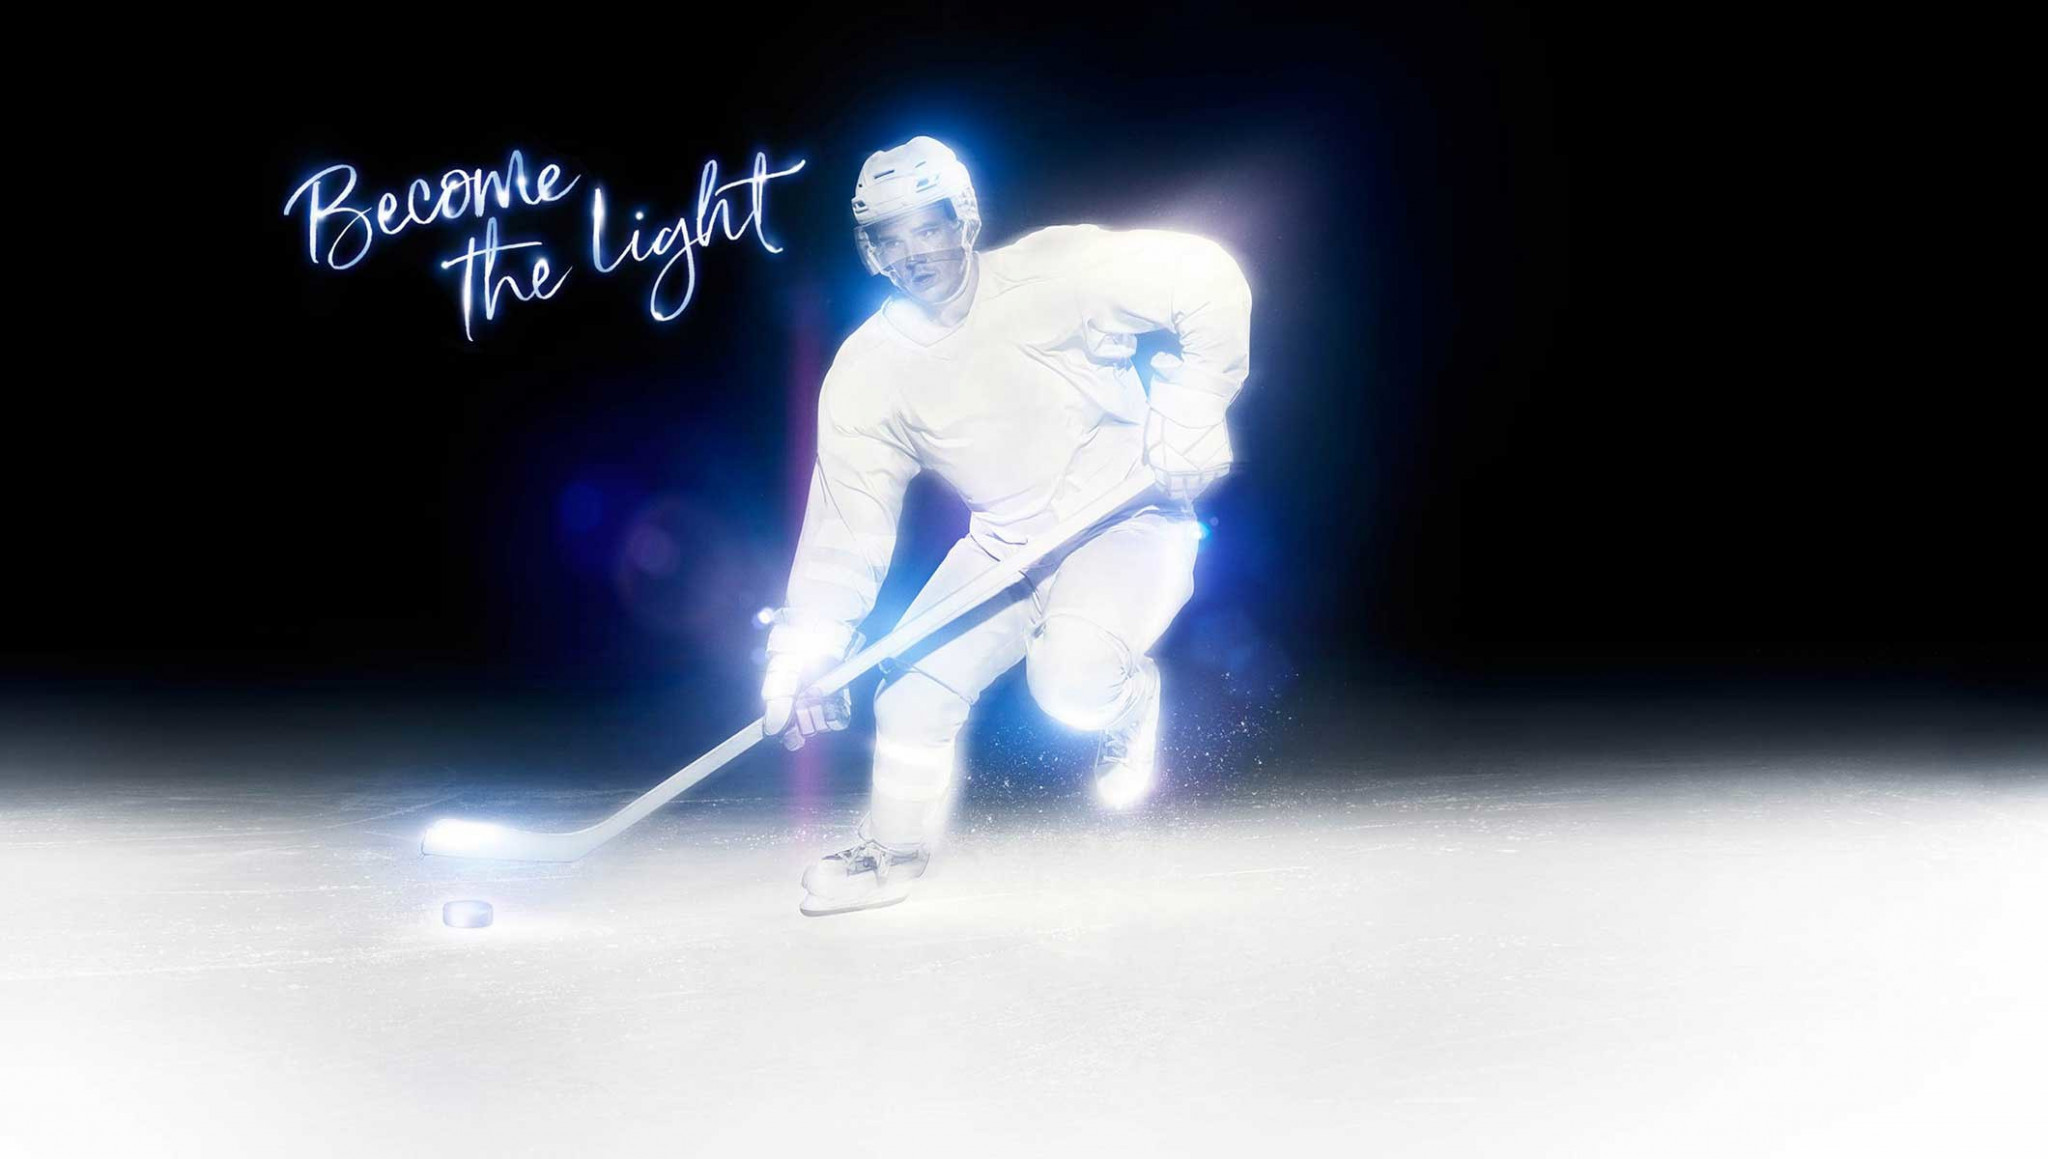 IOC launches Olympic brand campaign "Become The Light"